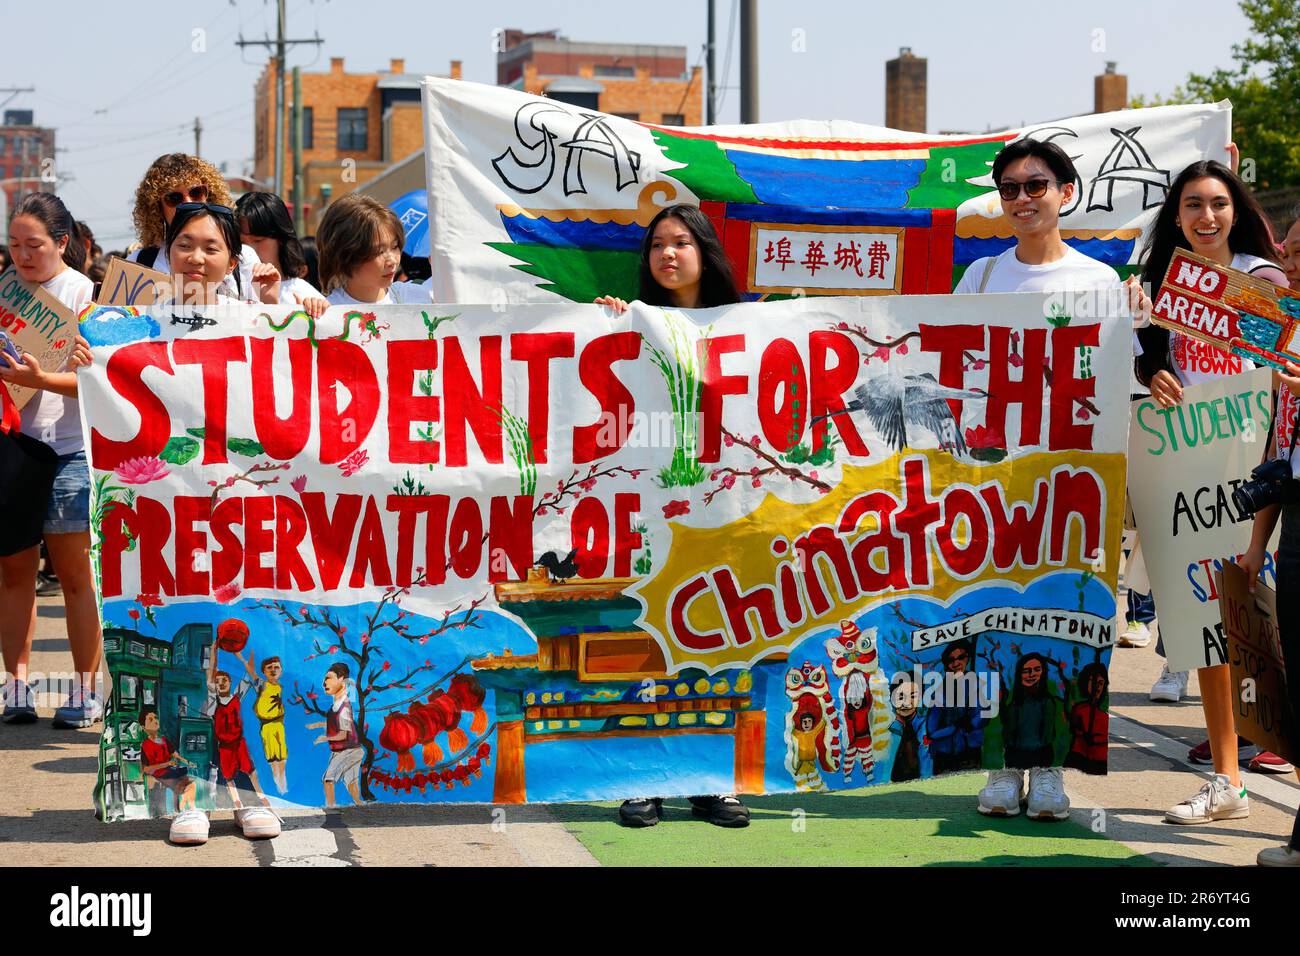 June 10, 2023, Philadelphia. No Arena in Chinatown protest march. Student activists hold a banner supporting Chinatown (see add'l info). Stock Photo